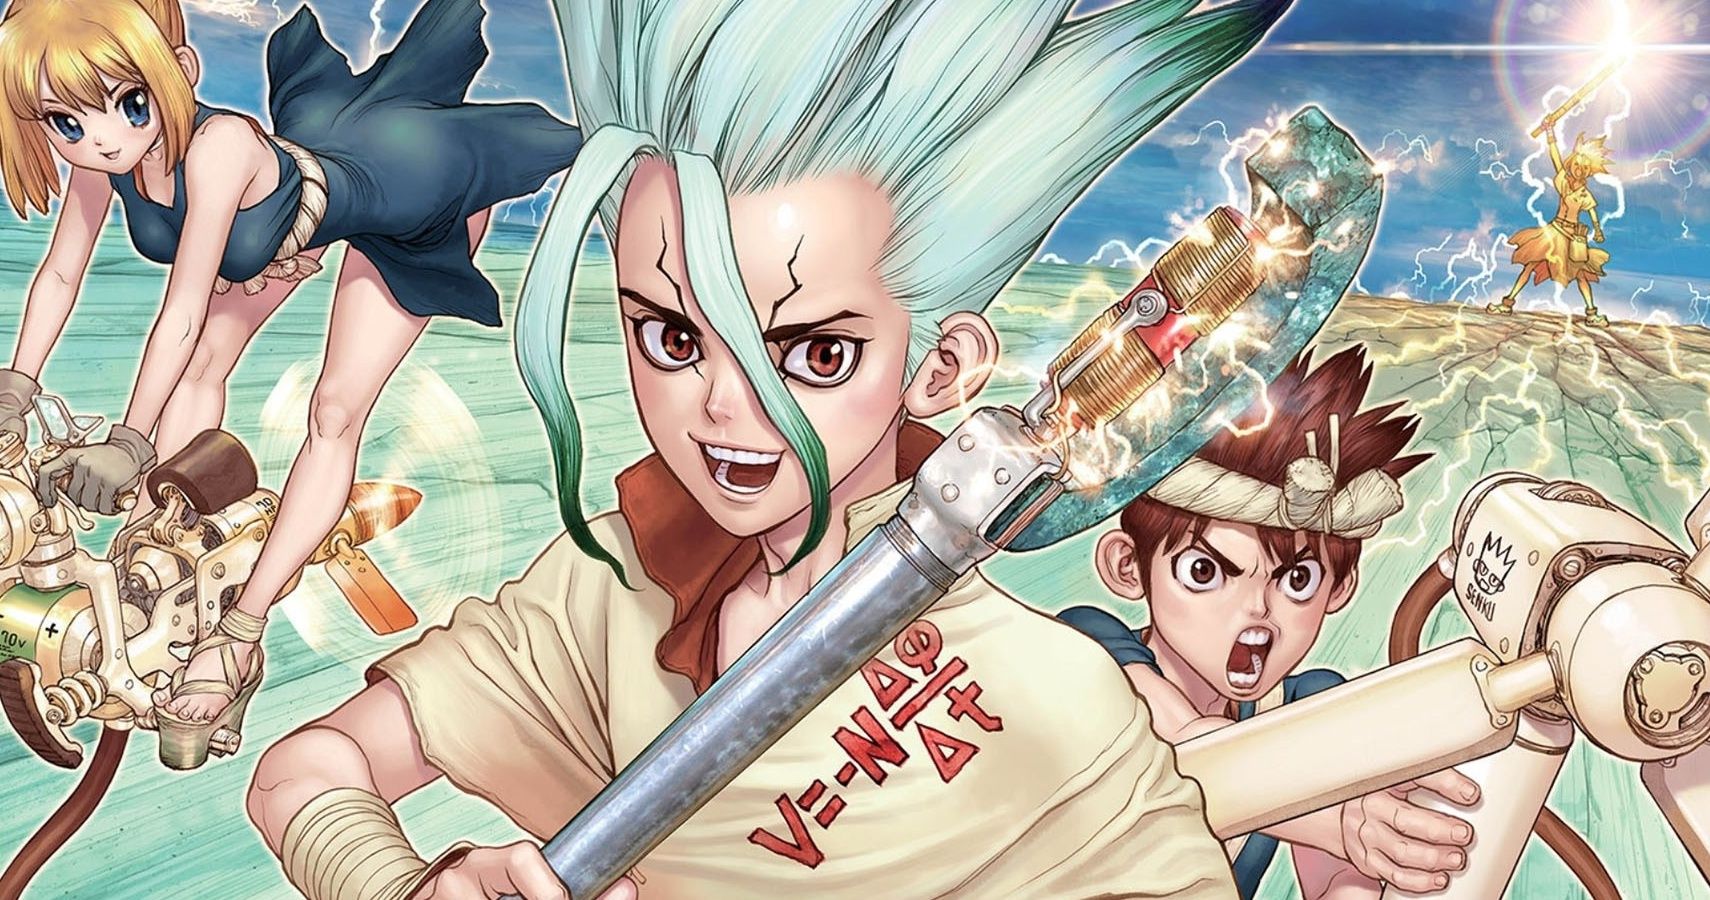 5 Reasons We're Looking Forward to Dr. Stone Season 2 (& 5 Why We're Not)